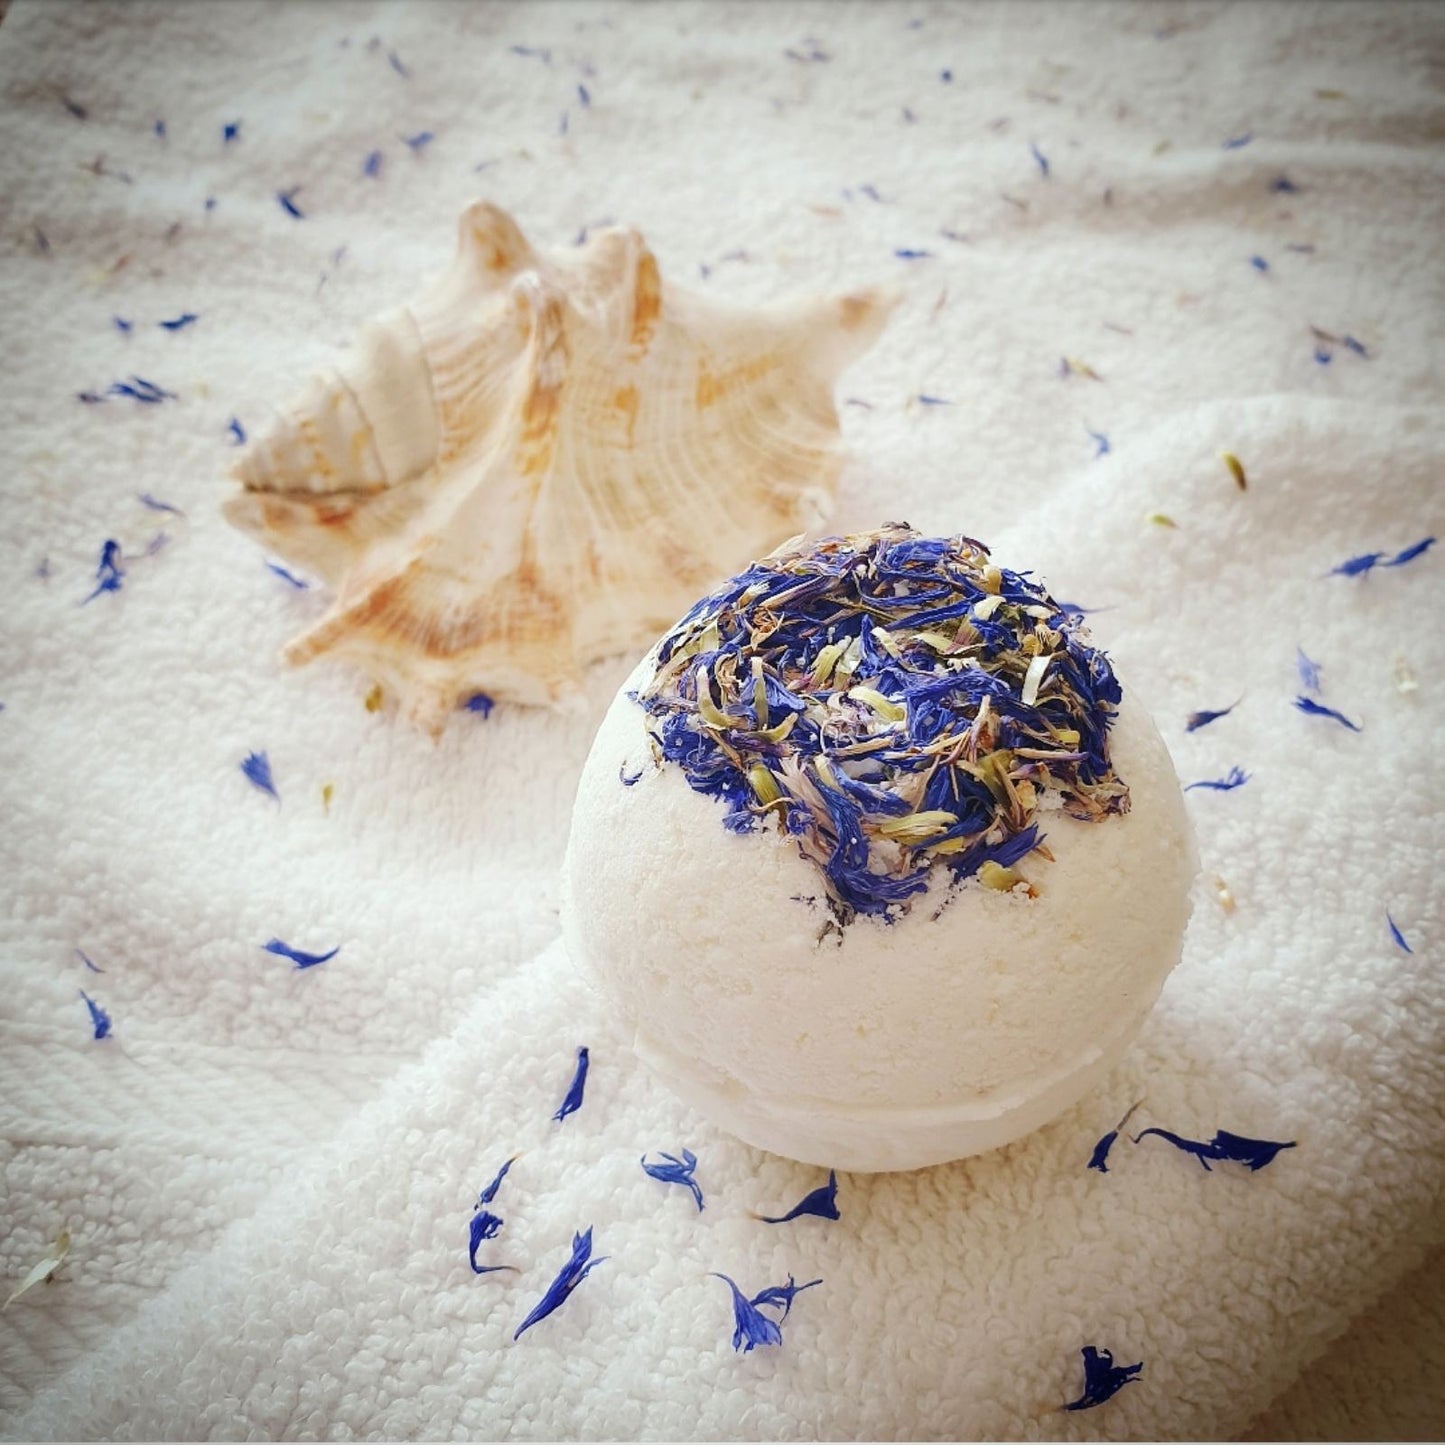 A side view of The Eden Collections Three Butters Secret Bath Bomb, highlighting the size of the bath bomb and the dried flowers encased in the top of the bath bomb.